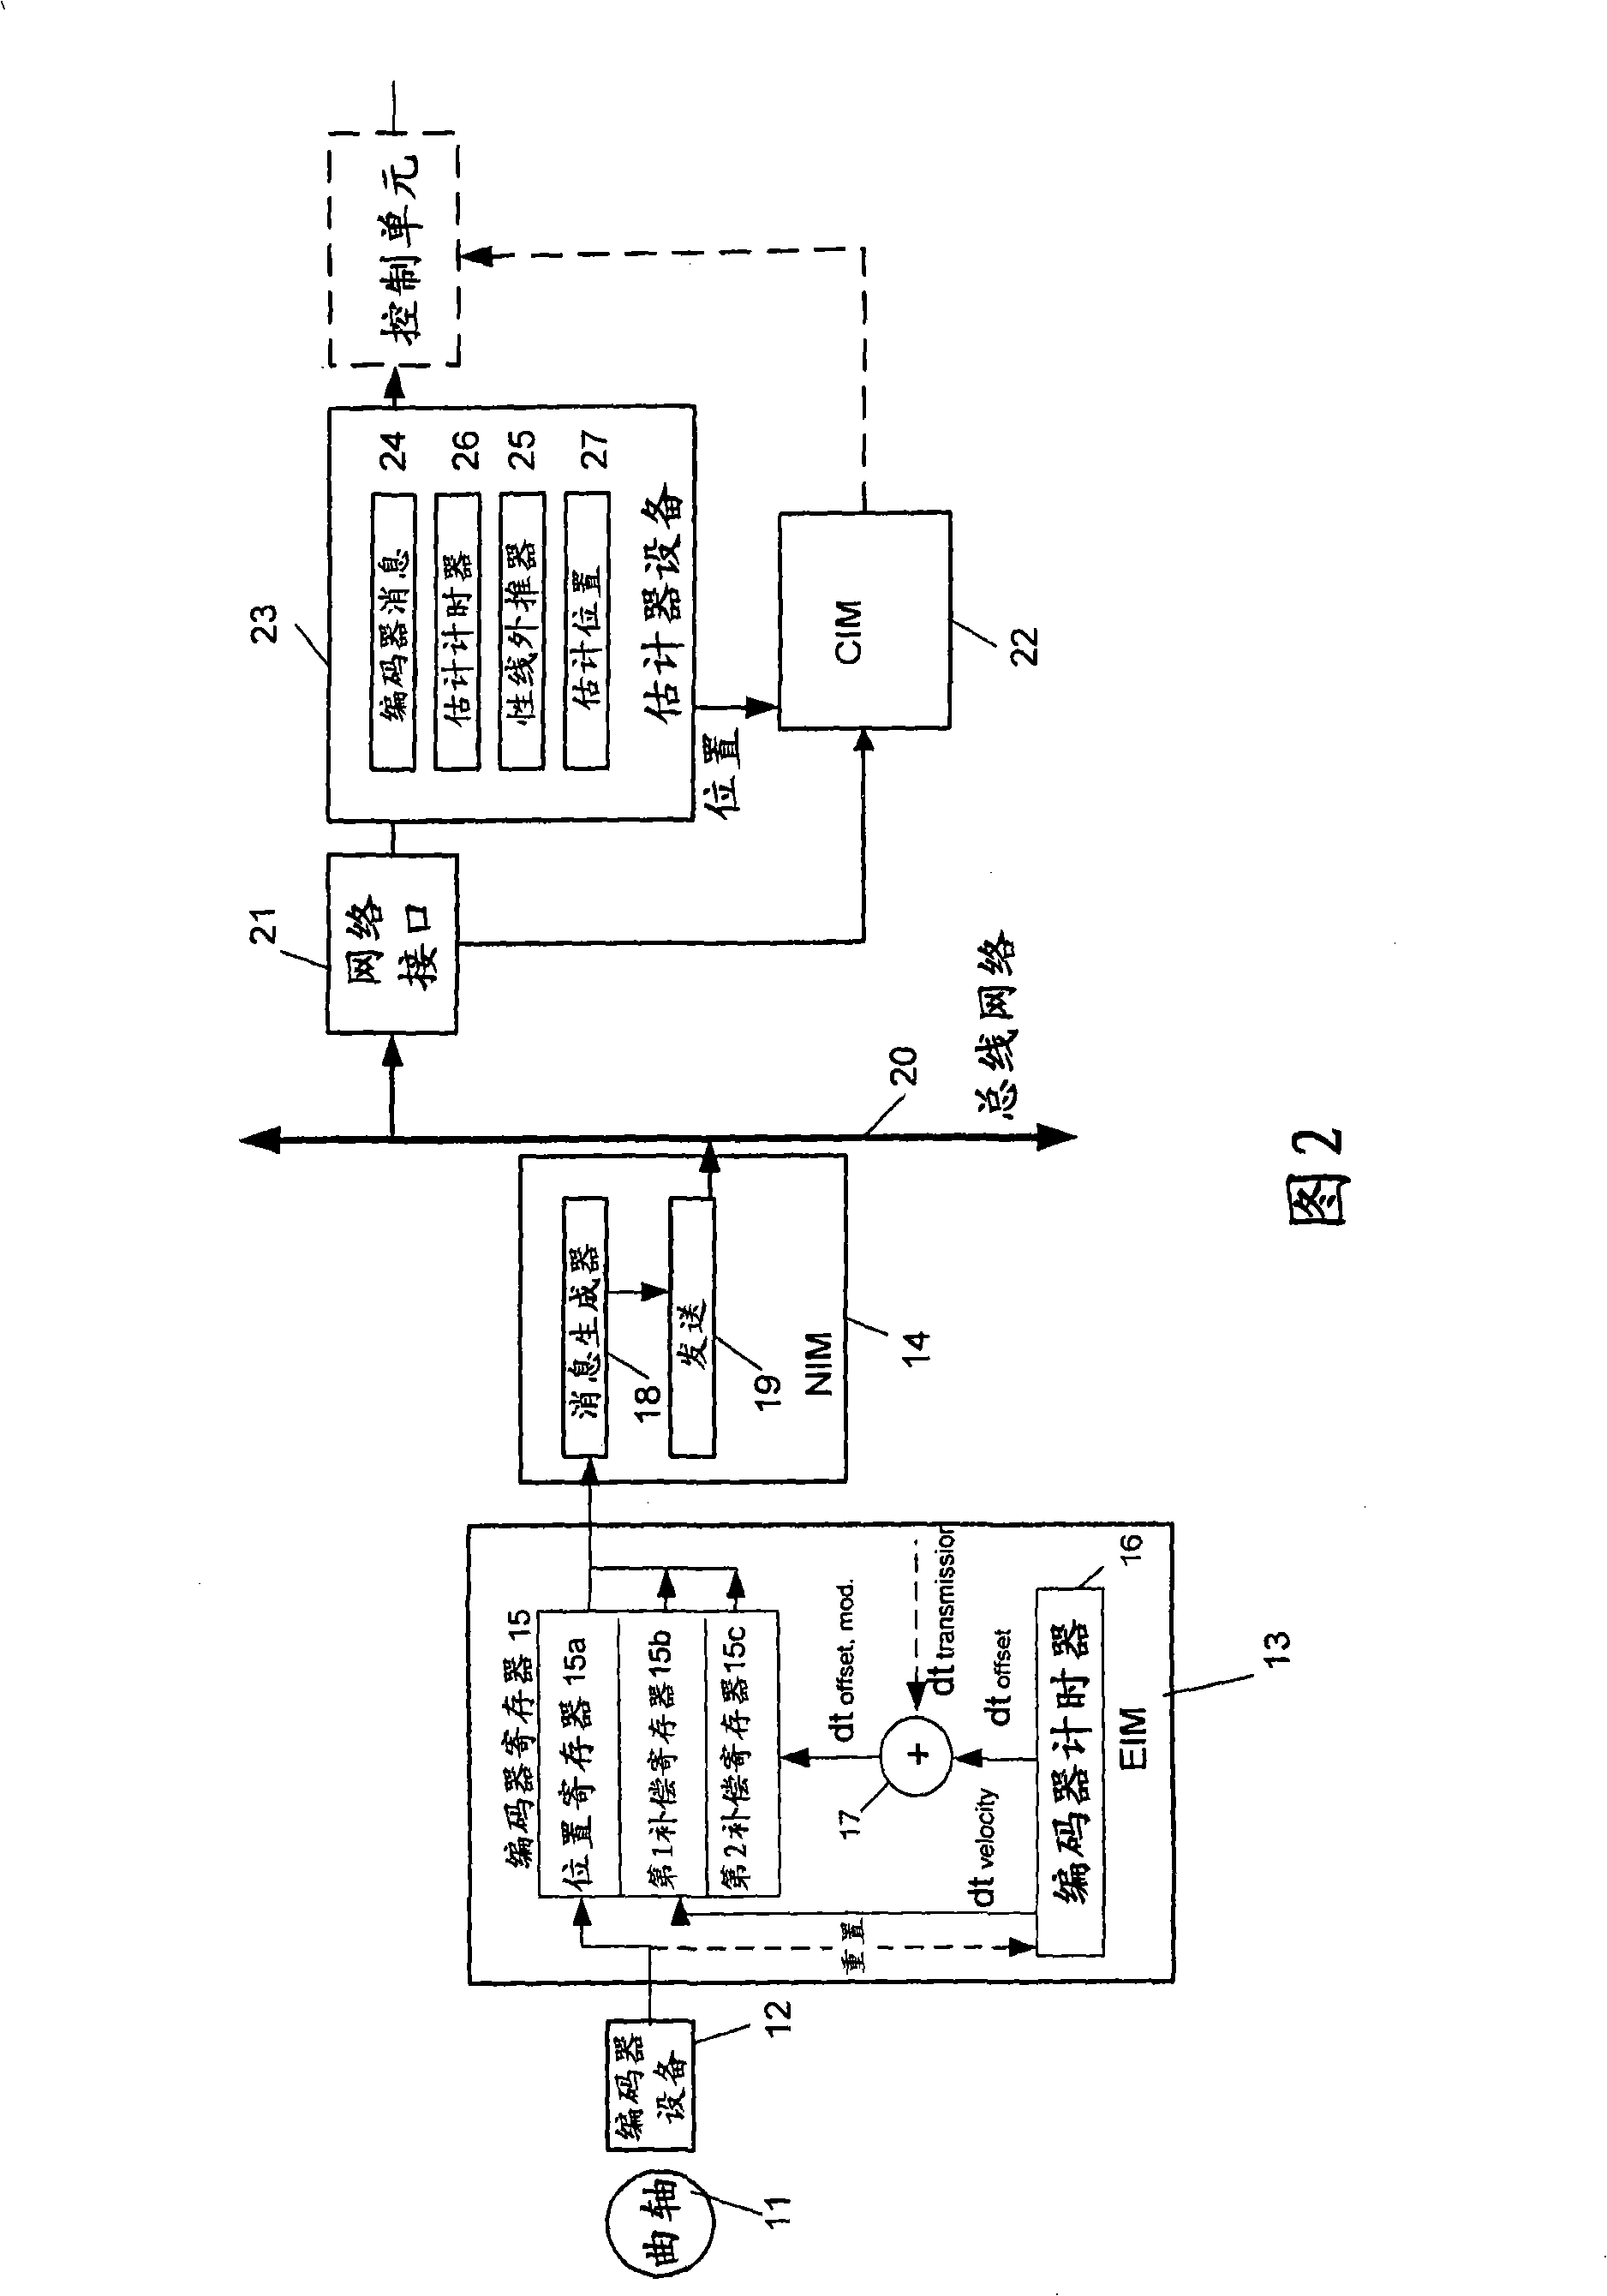 Method and system for controlling multi-cylinder internal combustion engine